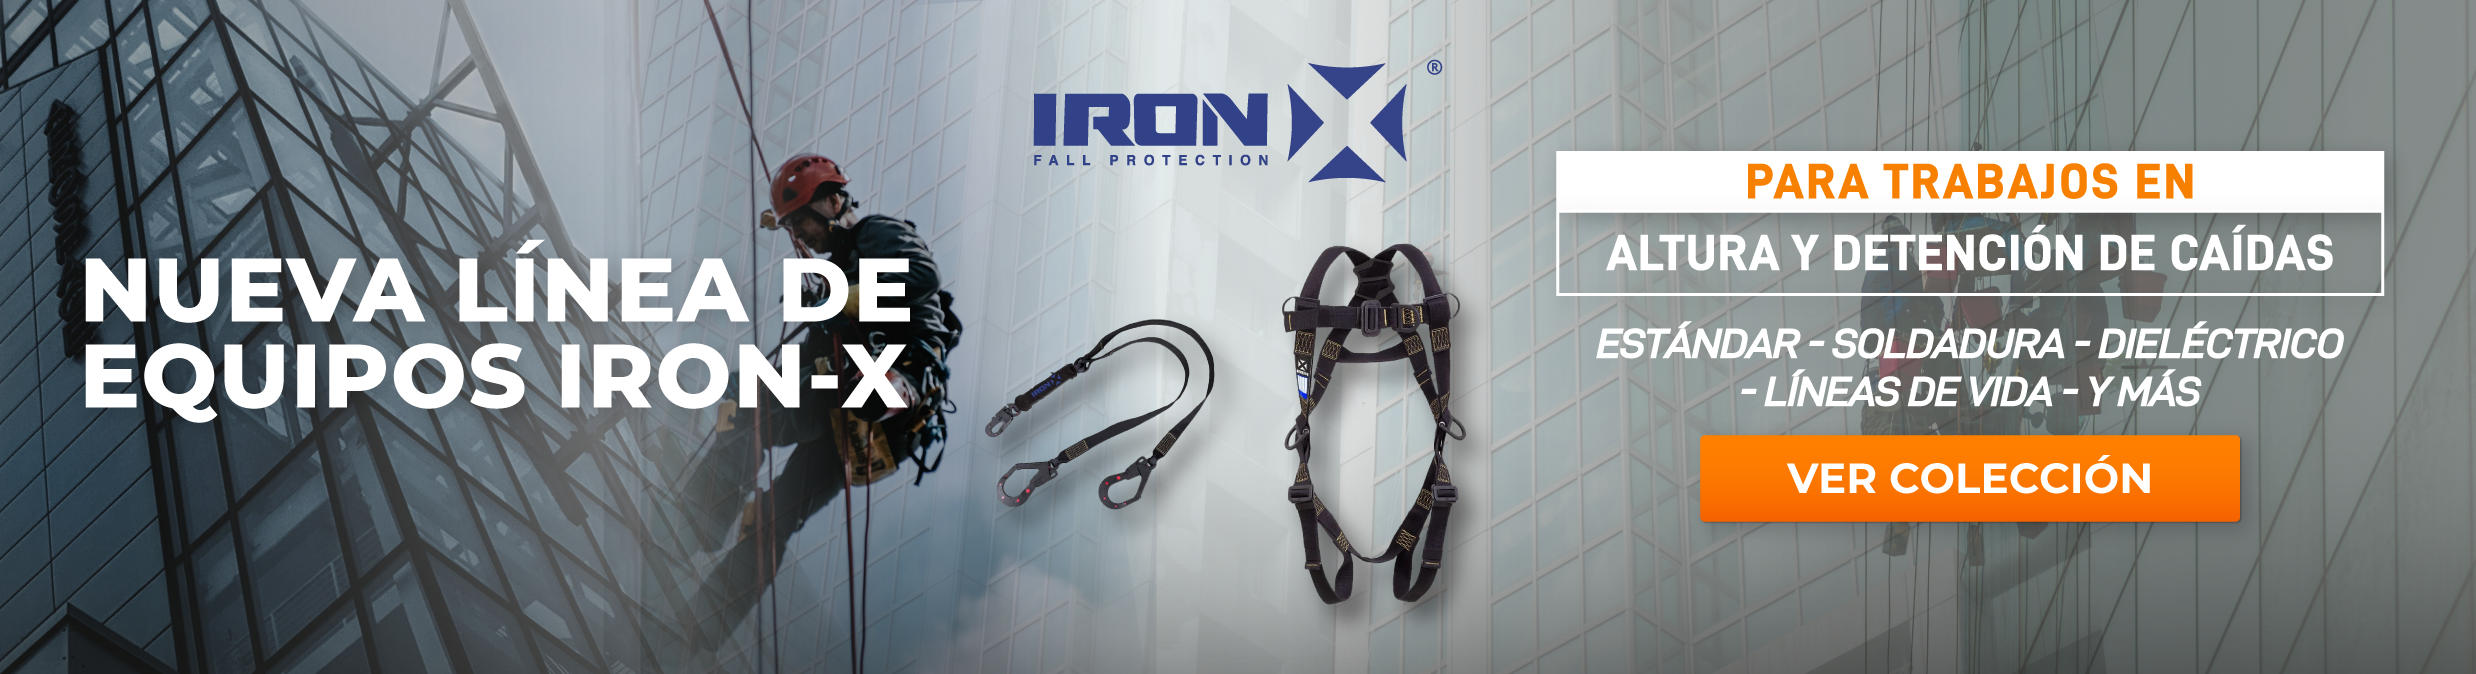 IRON X FALL PROTECTION